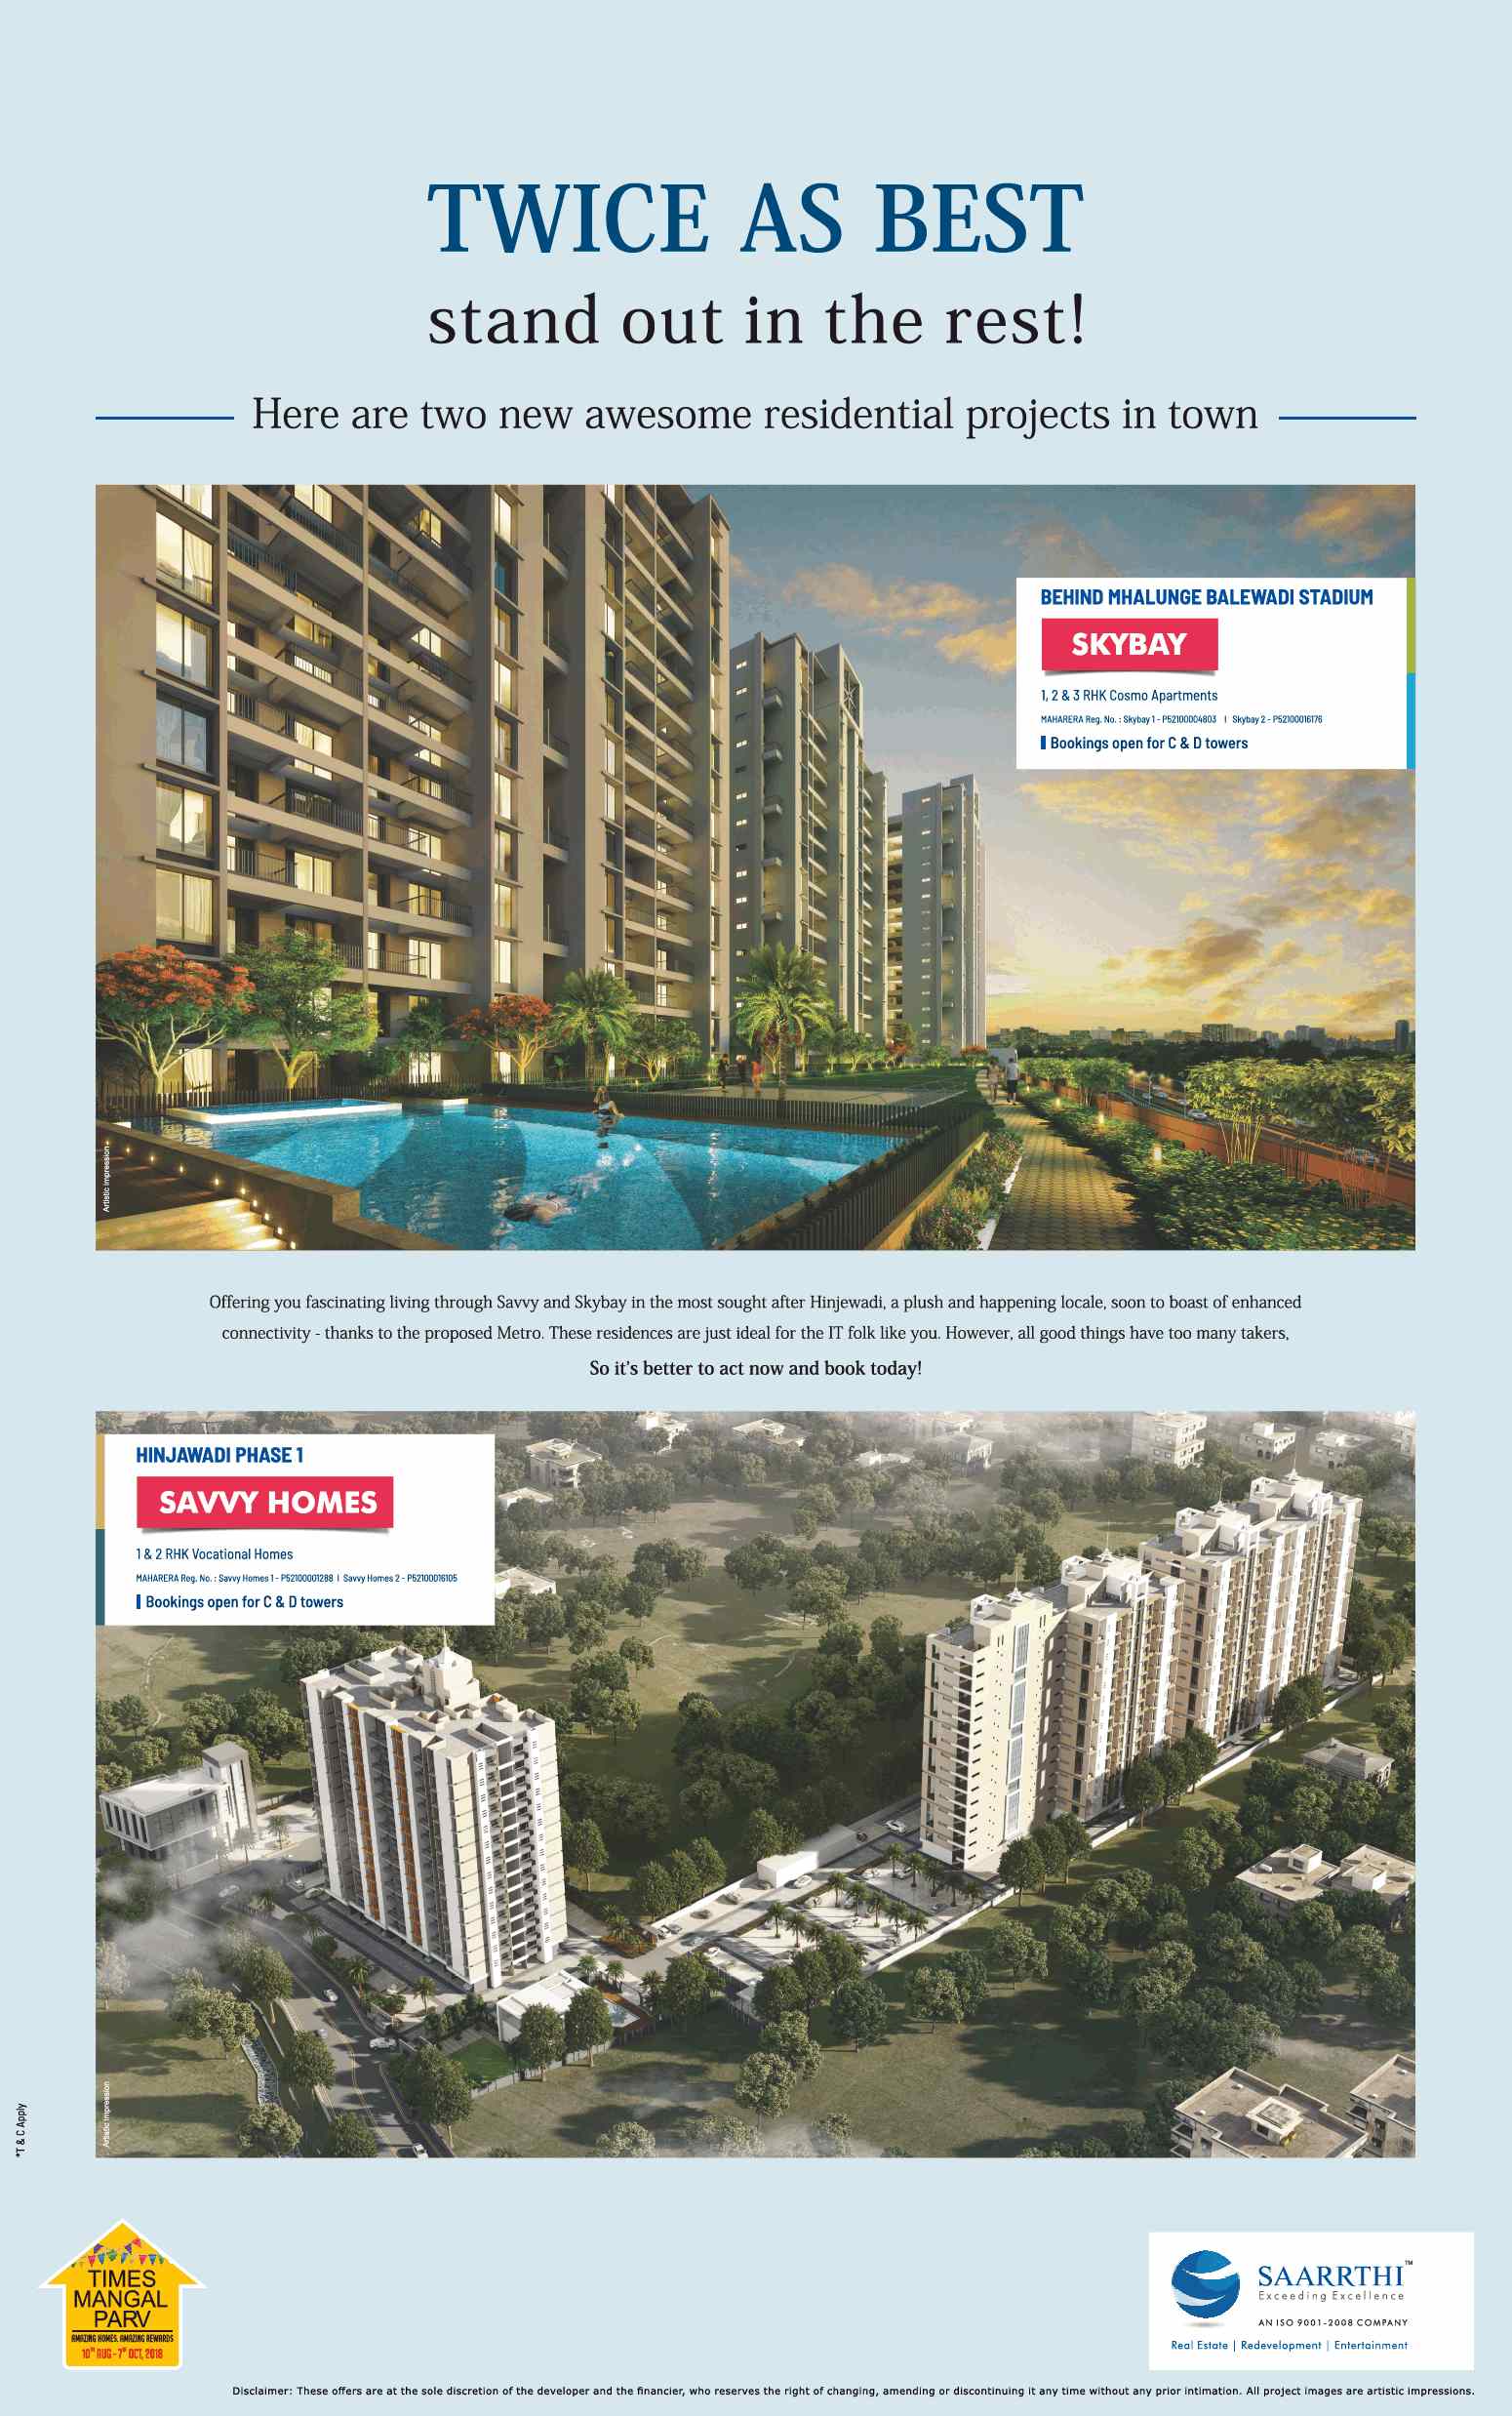 Awesome residential projects by Saarrthi Group for investment in Pune Update